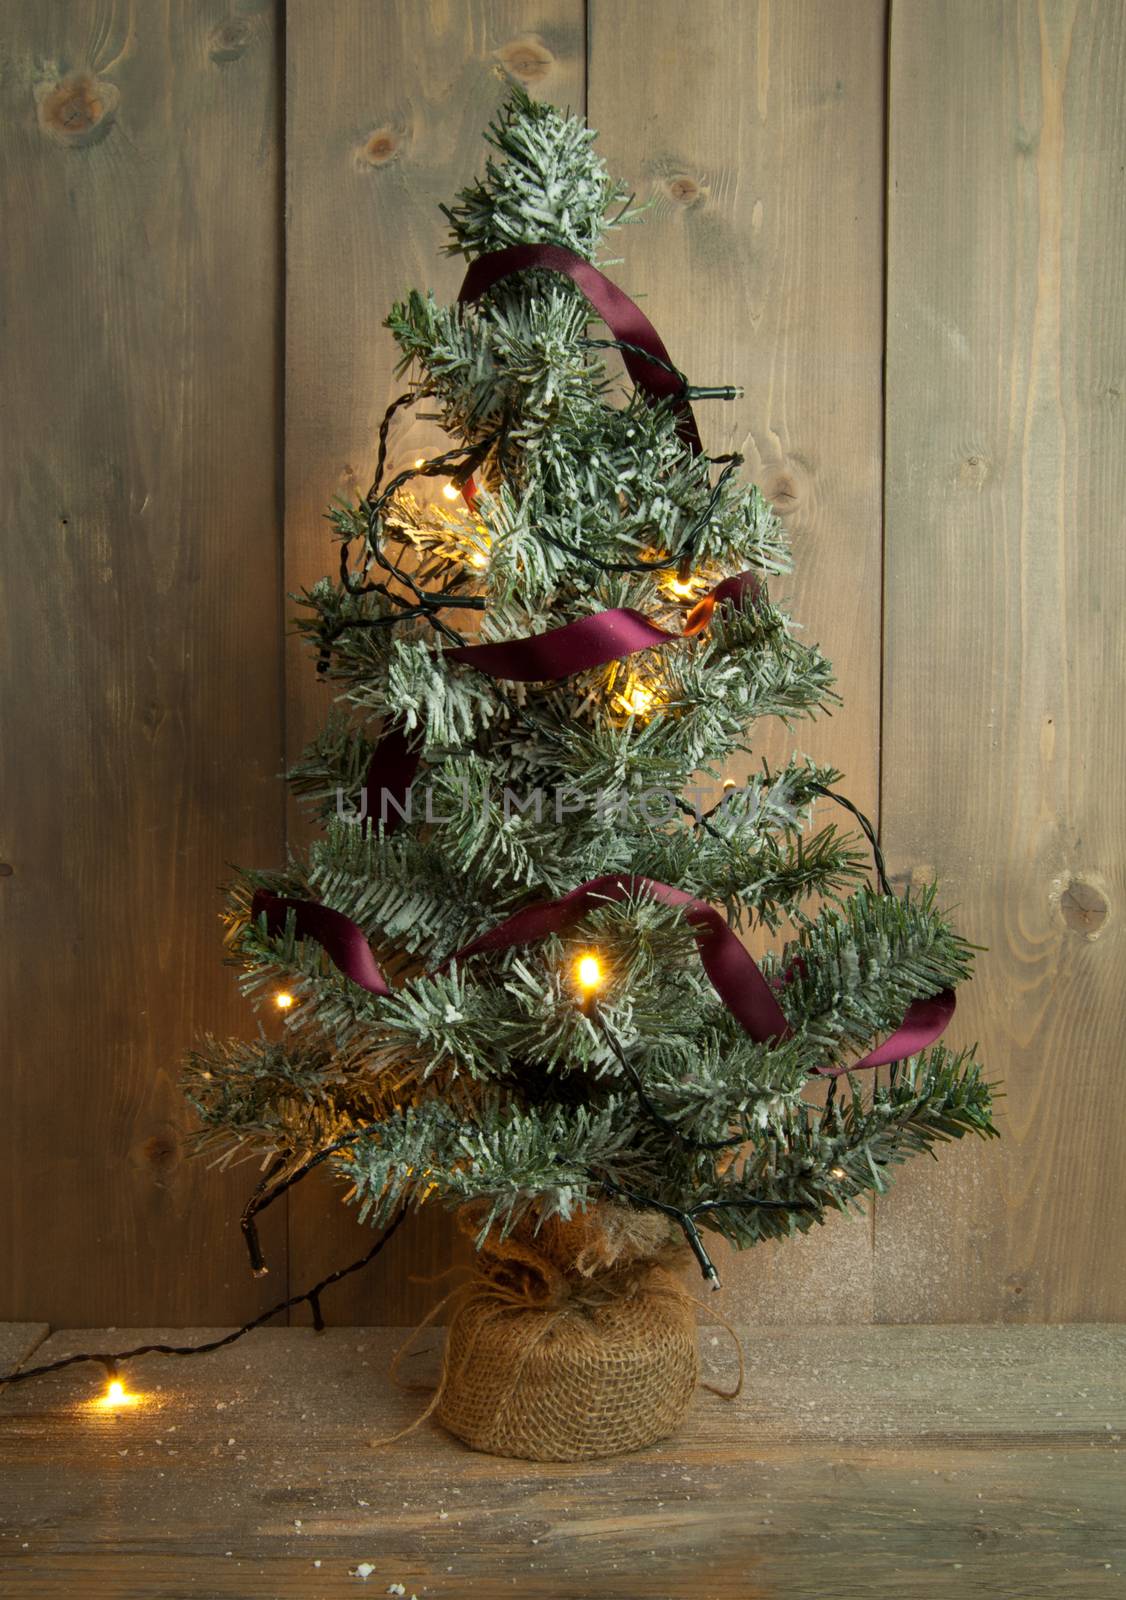 Christmas tree with lights and decorations